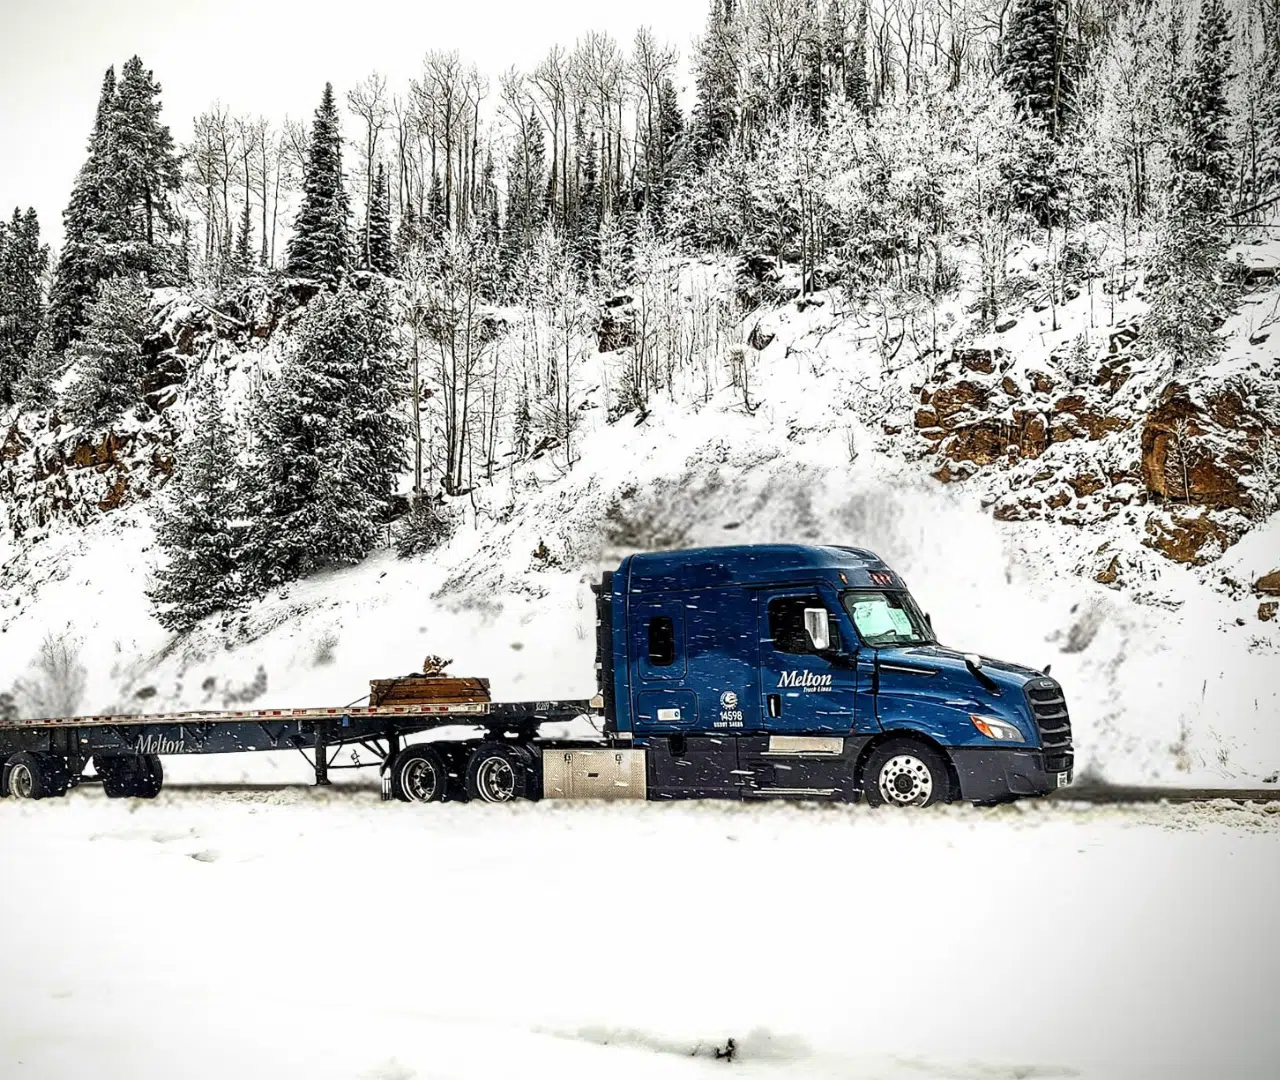 Photo of a Melton truck in the snow